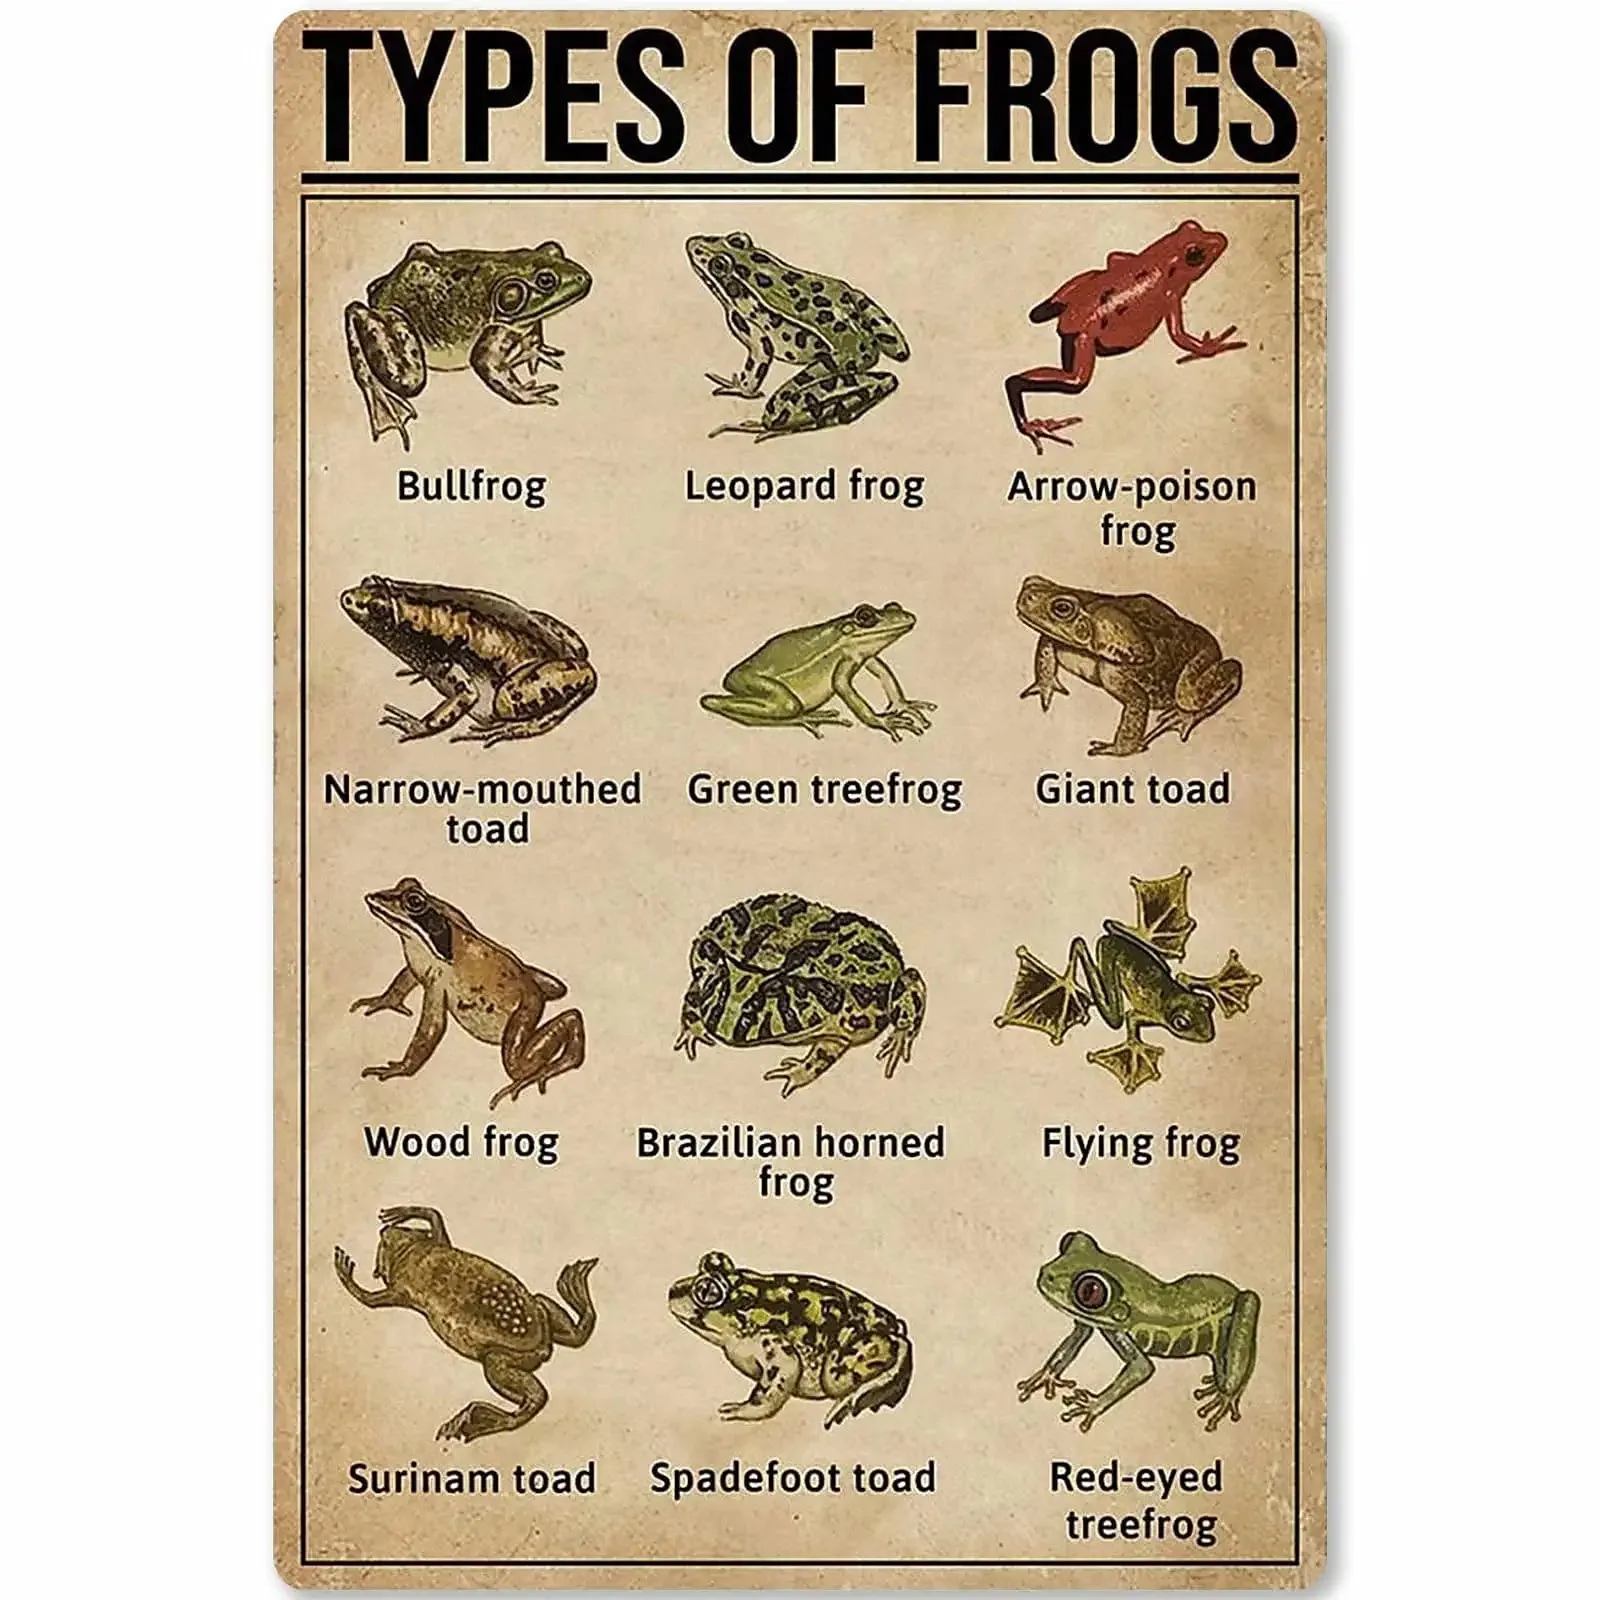 

Types Of Frogs Metal Signs Frogs Knowledge Popular Science Guide Room Club Farm Wall Decor 12x18 In